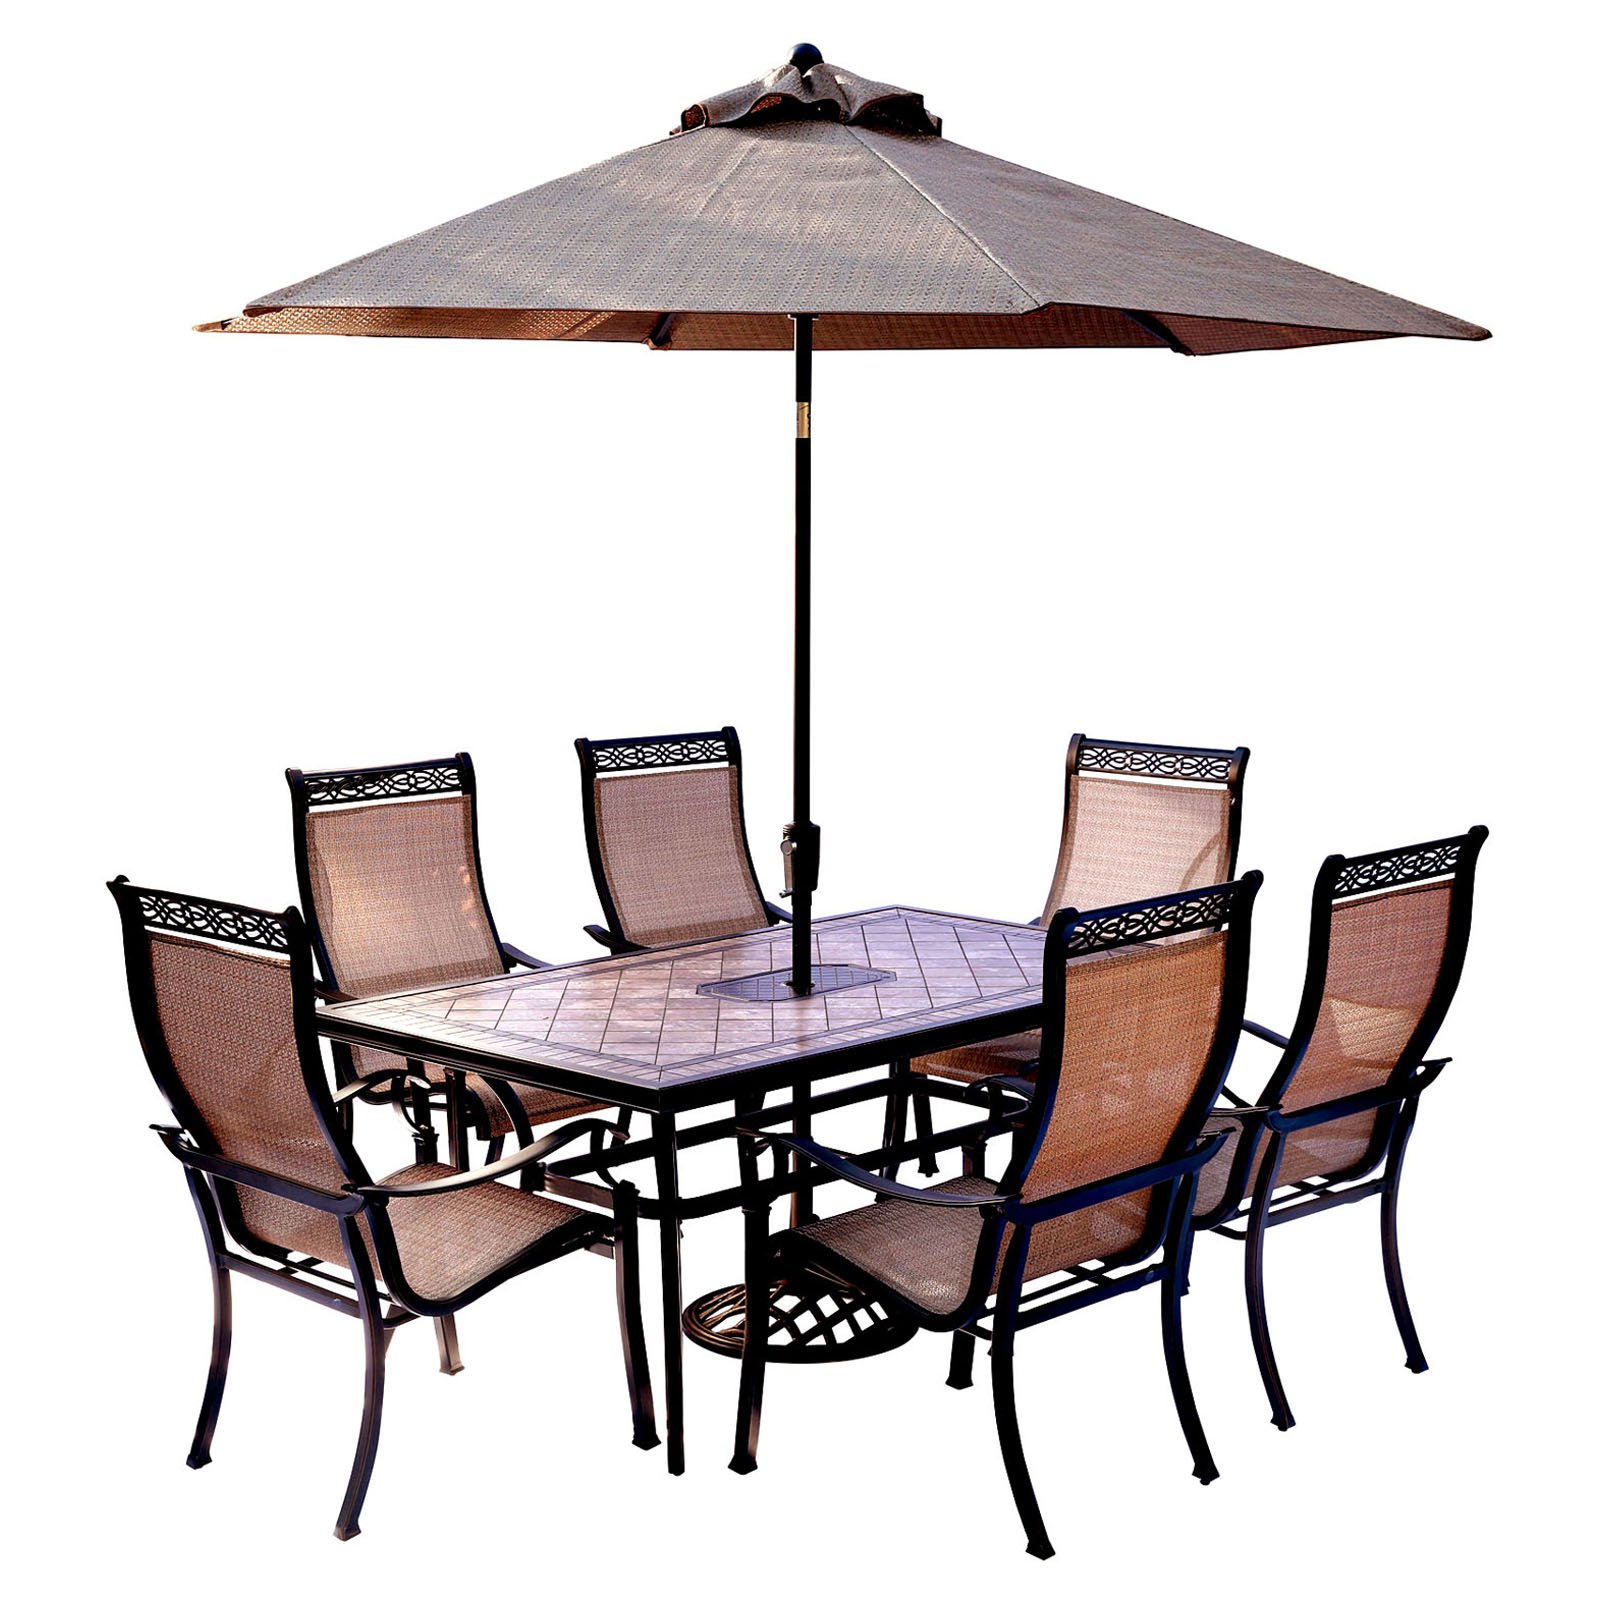 Hanover Outdoor Monaco 7-Piece Tile-Top Dining Set with Sling Chairs and Umbrella with Stand, Cedar - image 1 of 12